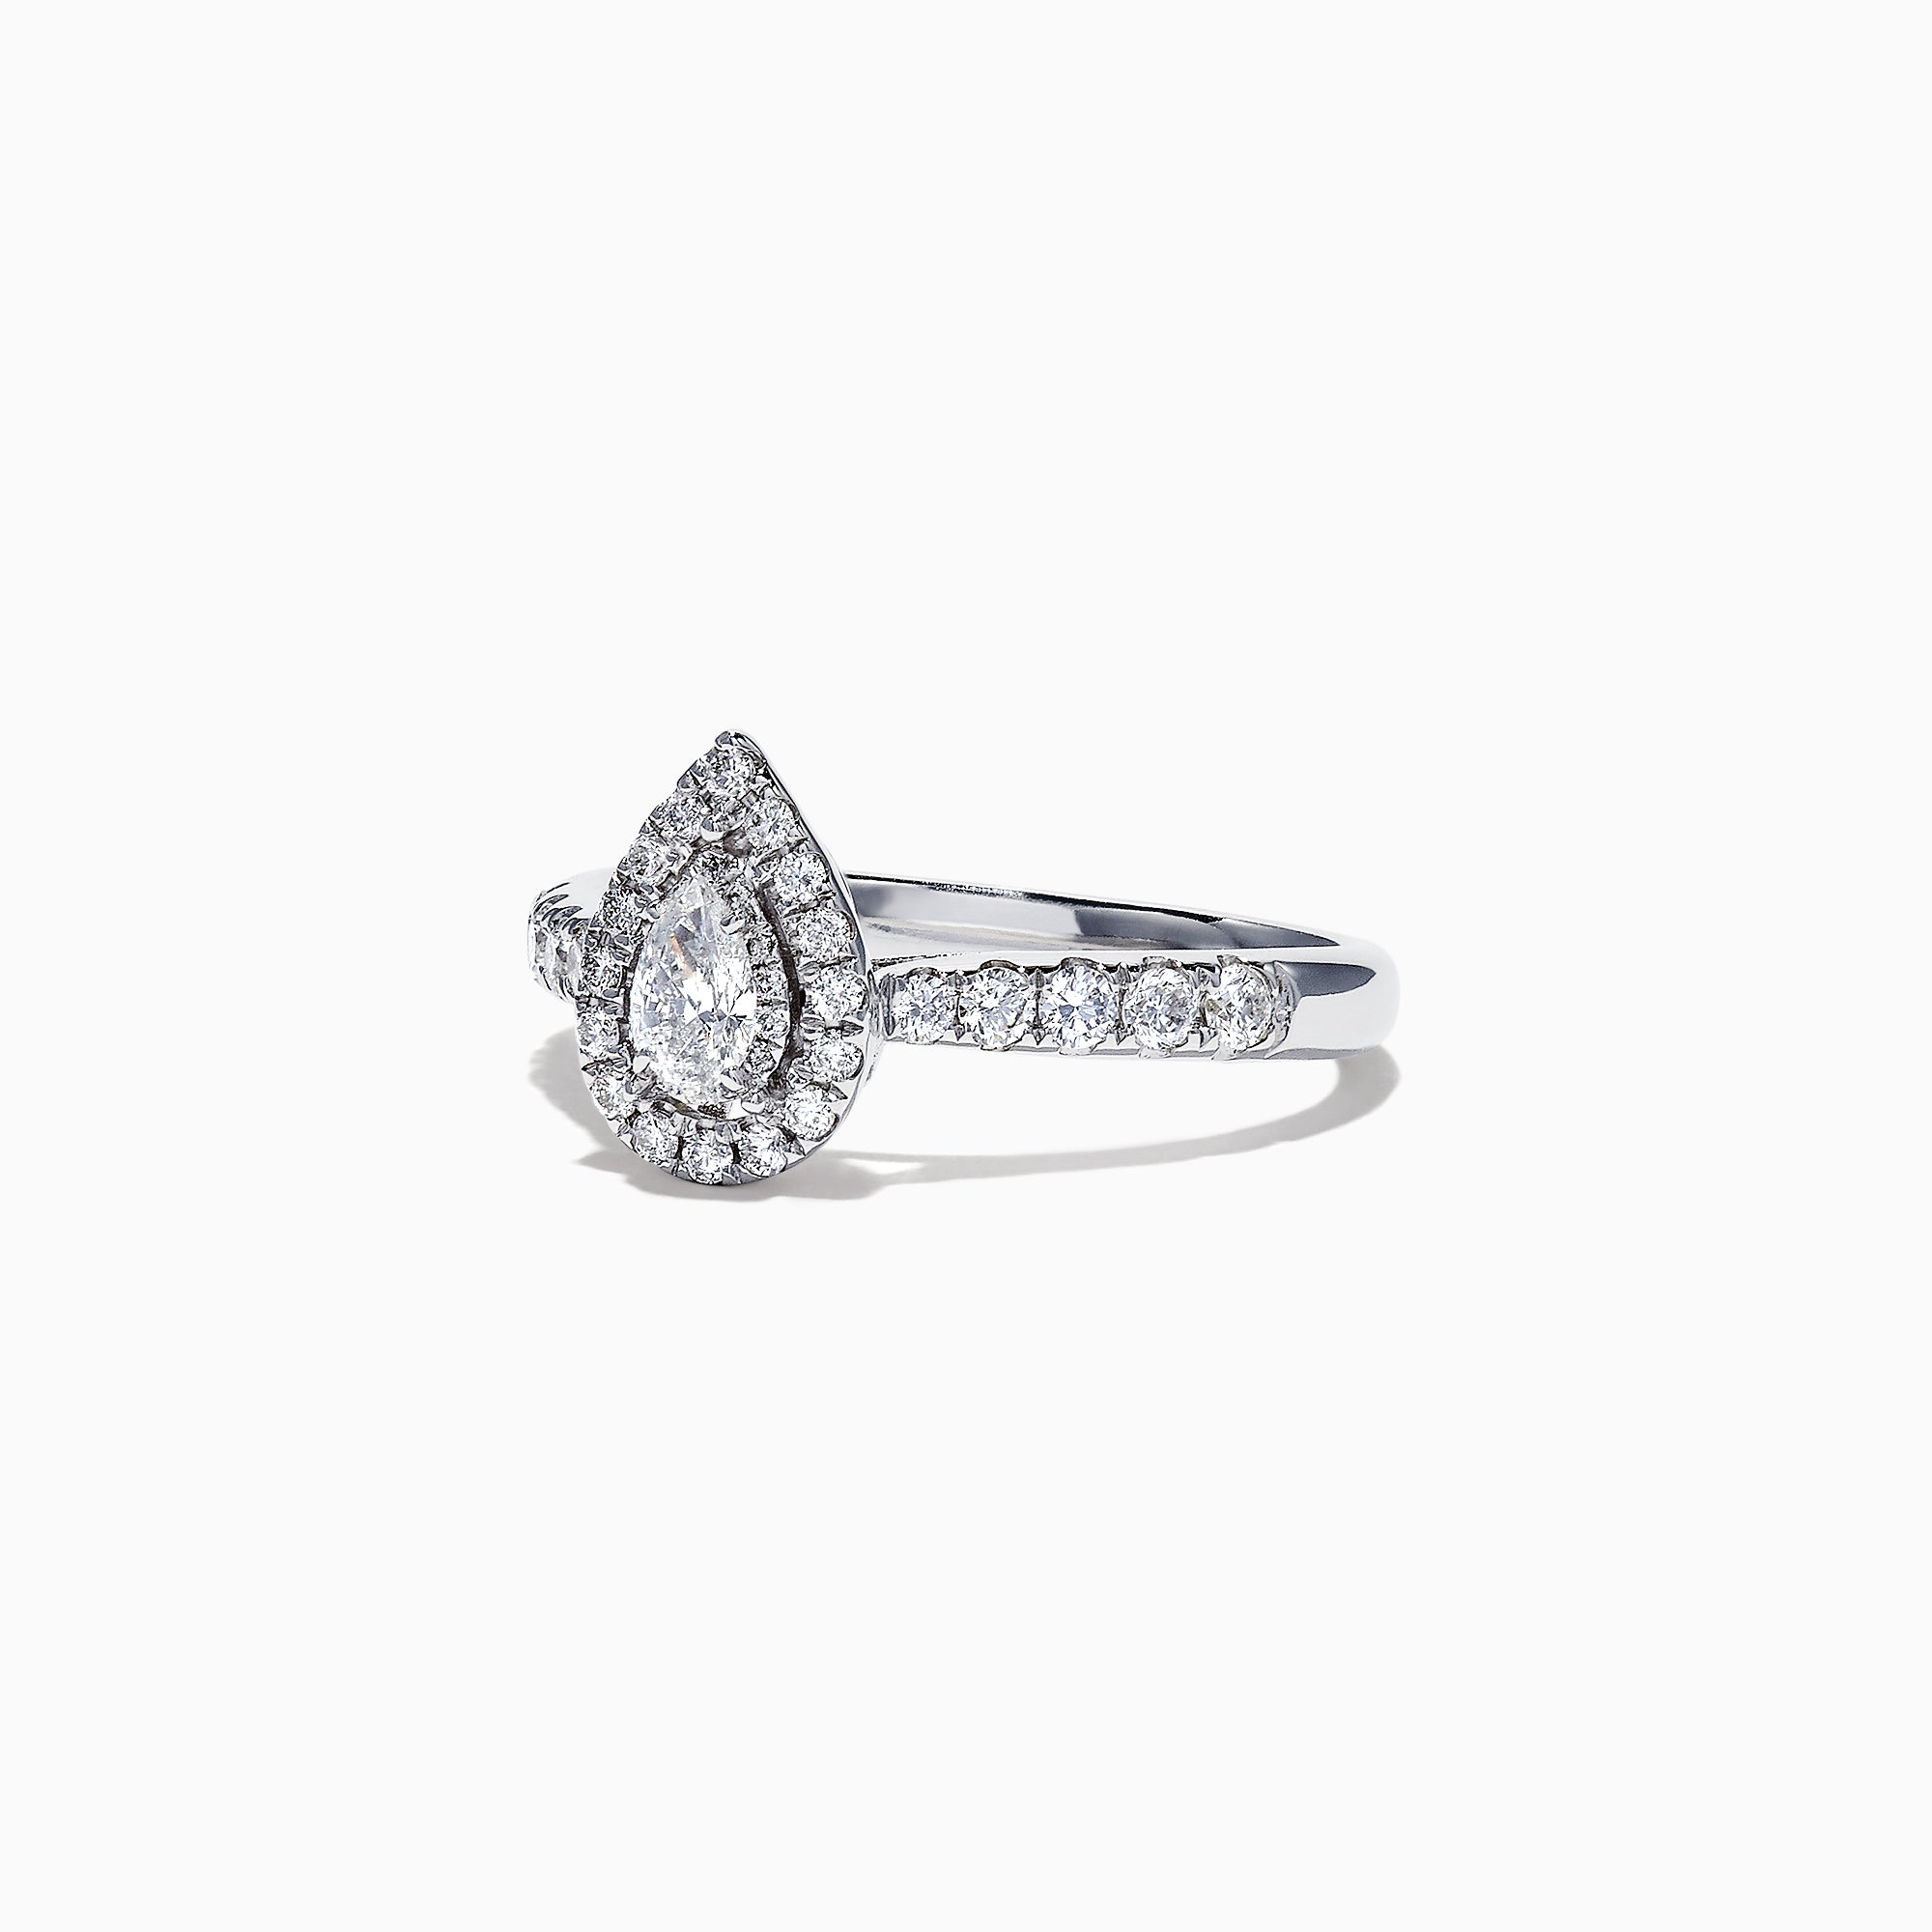 Effy Pave Classica 14K White Gold Diamond Pear Shaped Ring, 0.41 TCW